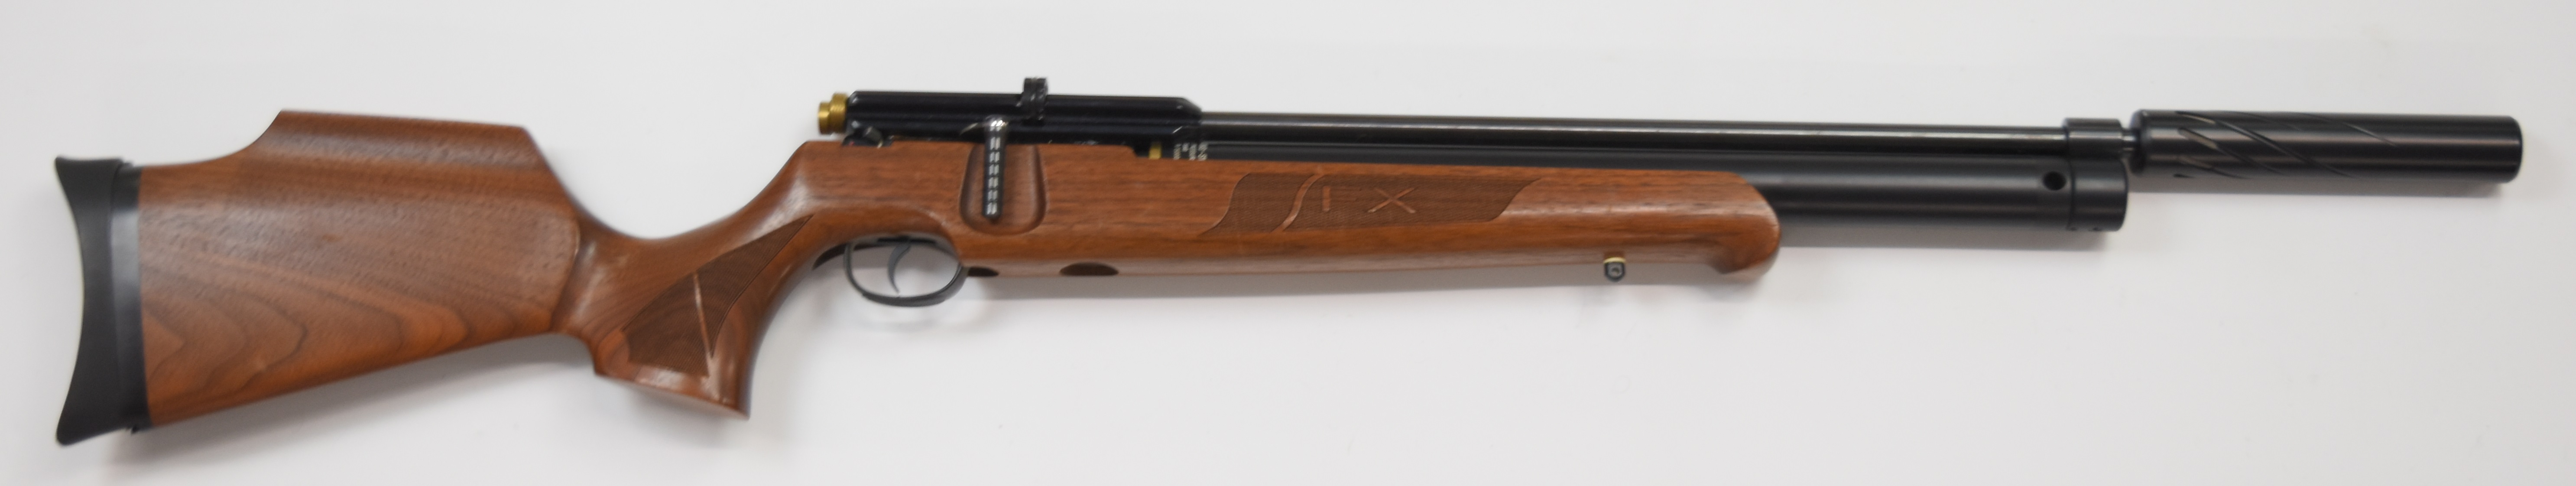 FX Cyclone .22 FAC PCP air rifle with textured semi-pistol grip and forend, raised cheek piece, - Image 2 of 10